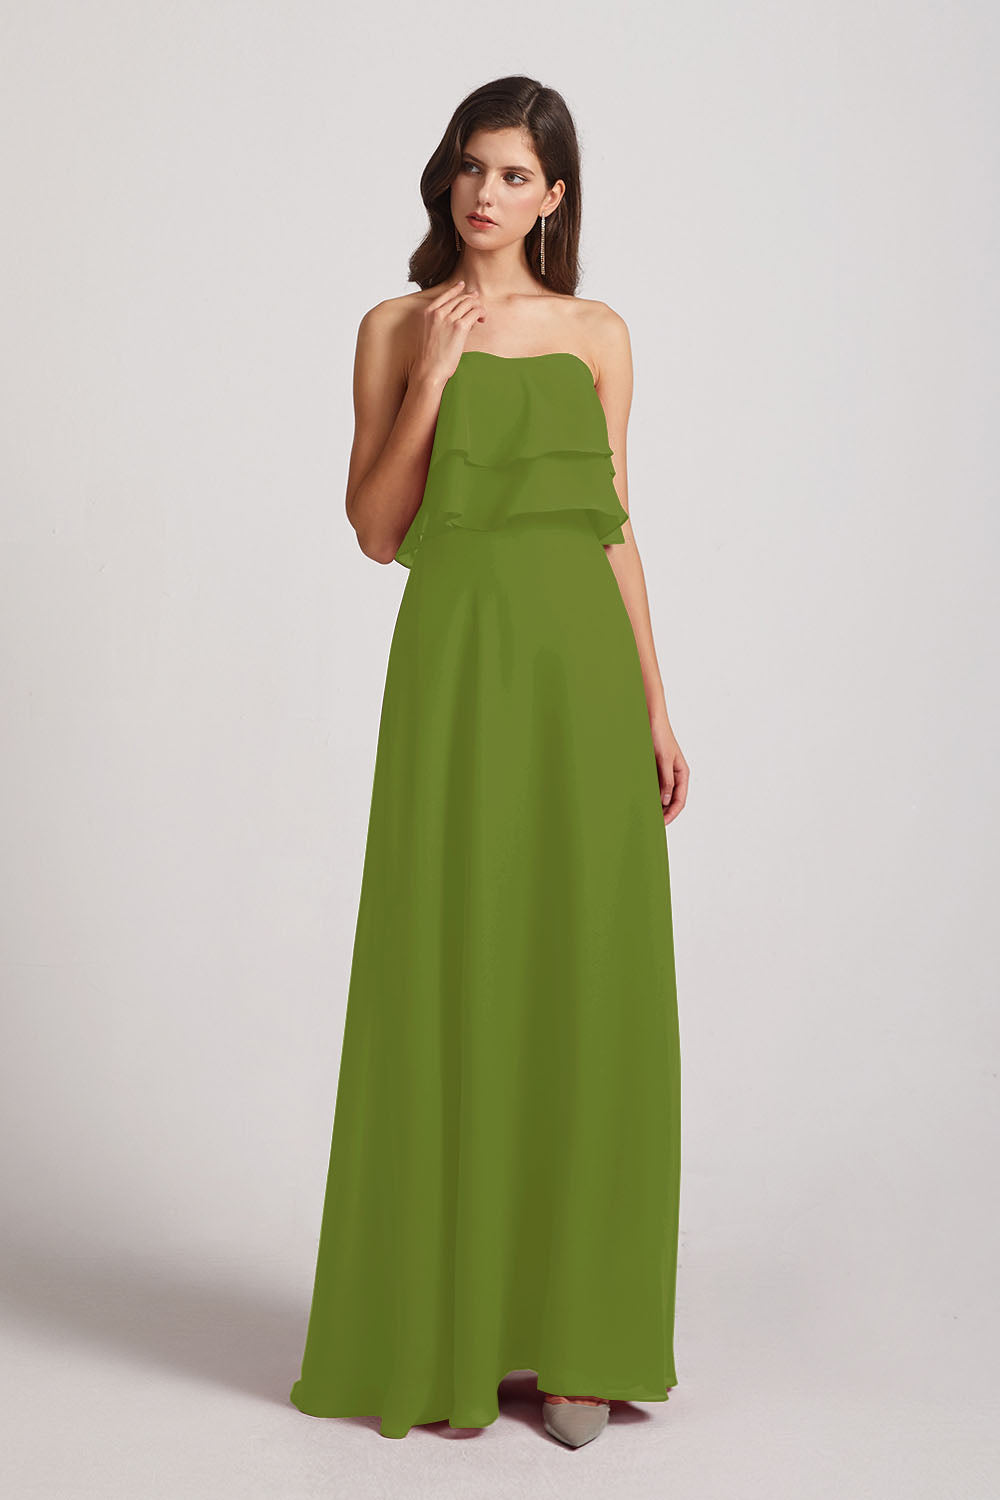 Alfa Bridal Olive Green Strapless Chiffon Bridesmaid Dresses with Tiered Ruffles (AF0086)